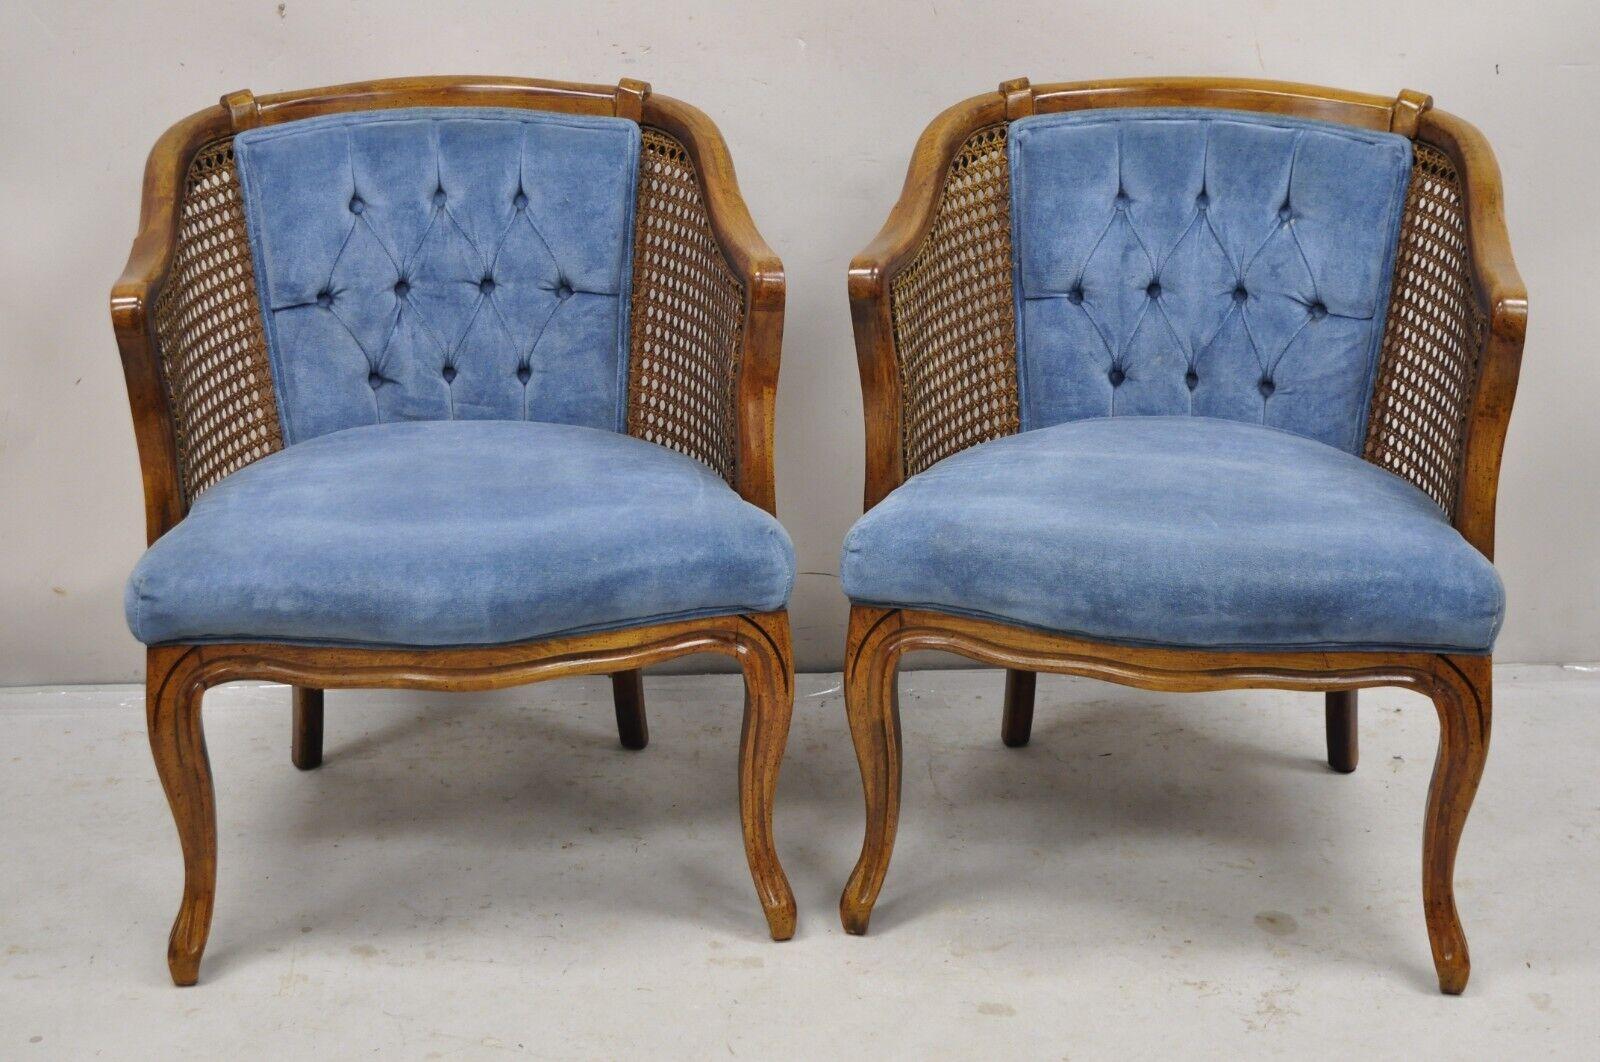 Vintage Hollywood Regency Cane Side Barrel Back Blue Cushion Club Lounge Chairs - a Pair. Circa Mid to Late 20th Century. Measurements: 31